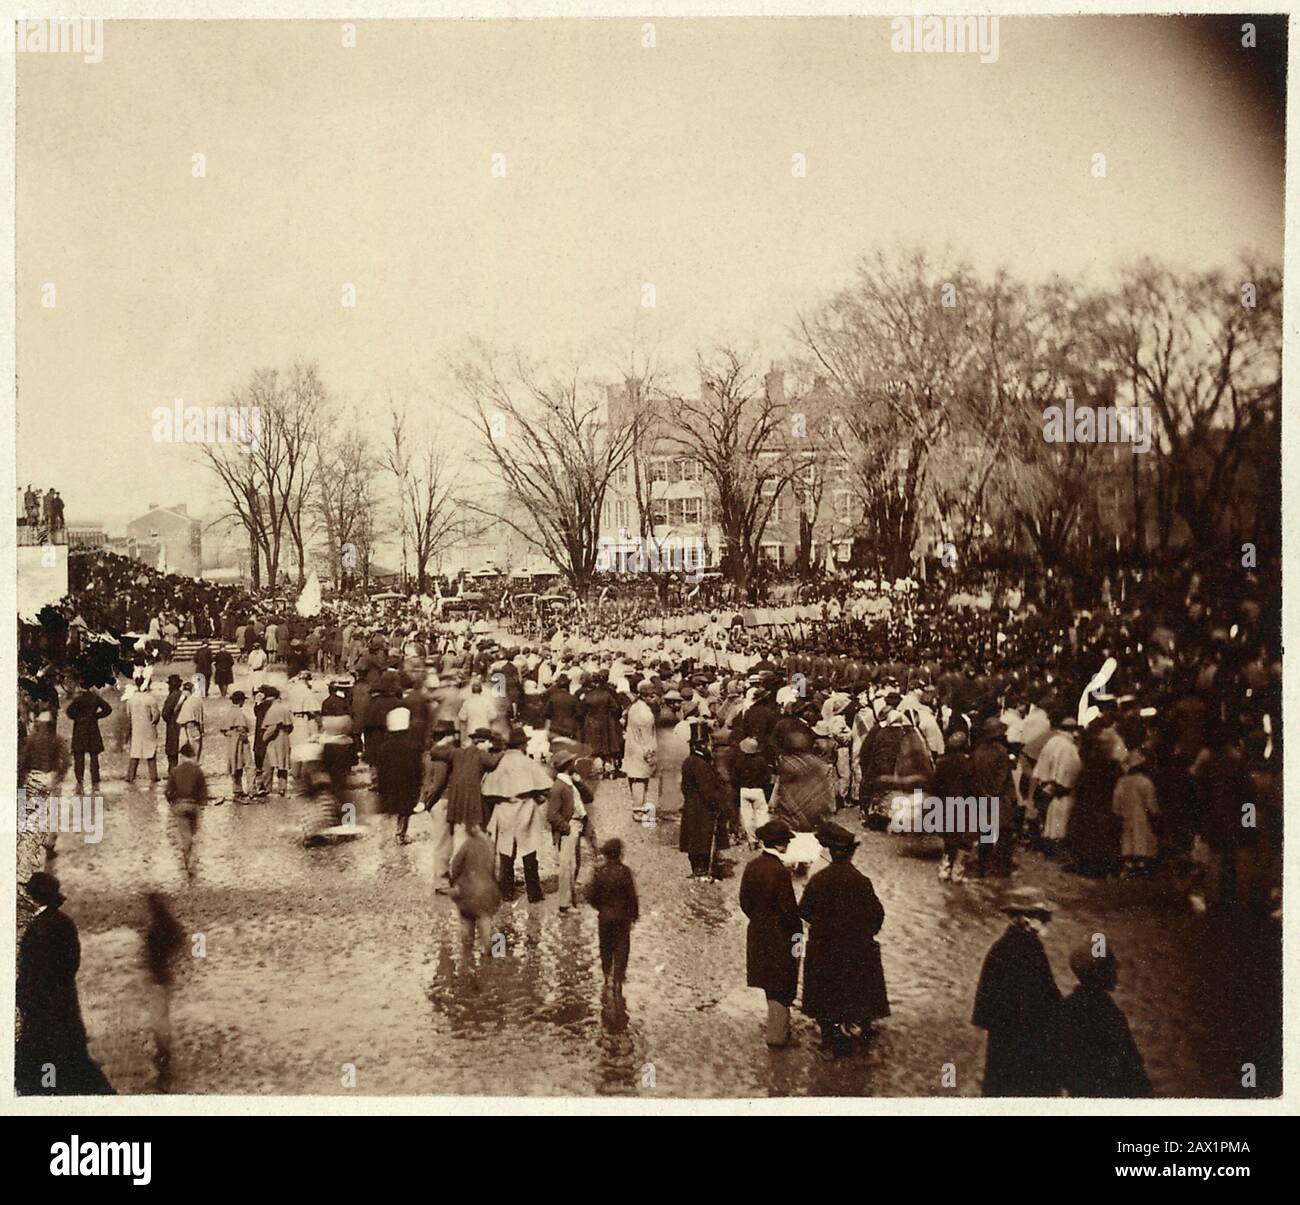 1865 , 4 march, WASHINGTON , DC , USA :  The Second Inauguration day of President The U.S.A. ABRAHAM LINCOLN ( Big South Fork , KY, 1809 - Washington 1865 ). Photo shows a large crowd of people waiting during President Abraham Lincoln's inauguration, which was held on a rainy day at the U.S. Capitol grounds in Washington, D.C. The crowd includes African American troops who marched in the inaugural parade. In considering the Civil War that had begun in 1861 and was nearing conclusion - Presidente della Repubblica - Stati Uniti -  USA - CAMPIDOGLIO - CAPITOLIUM - CERIMONIA D' INSEDIAMENTO  ---- Stock Photo